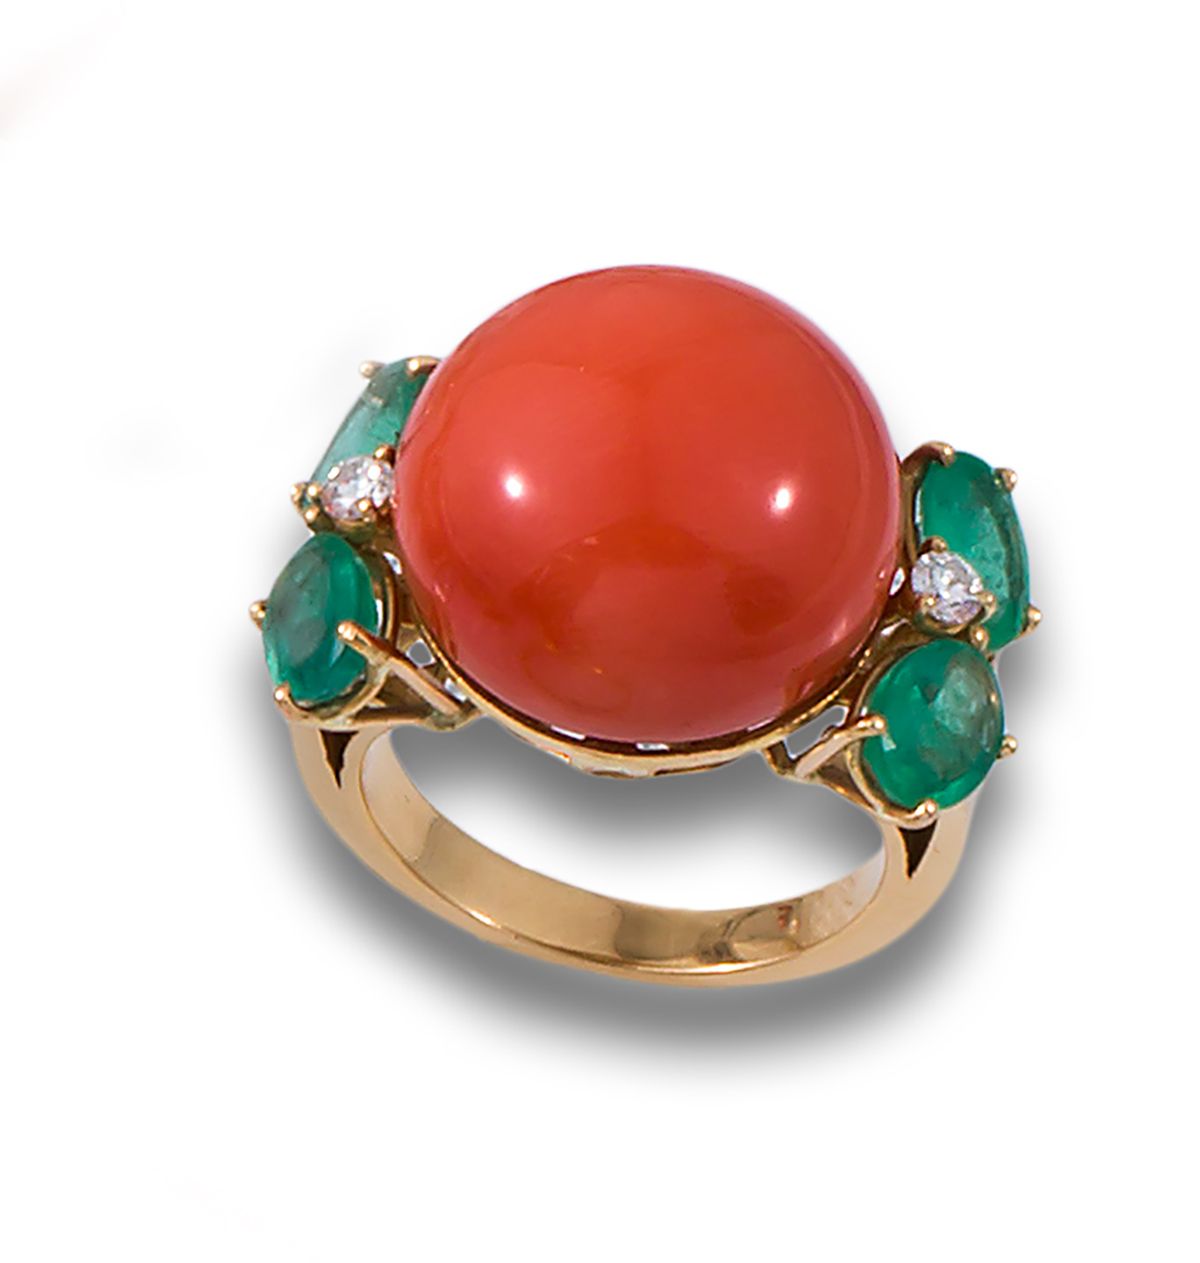 RING CORAL, EMERALDS, BRILLIANTS. GOLD 18kt yellow gold ring comprising a Medite&hellip;